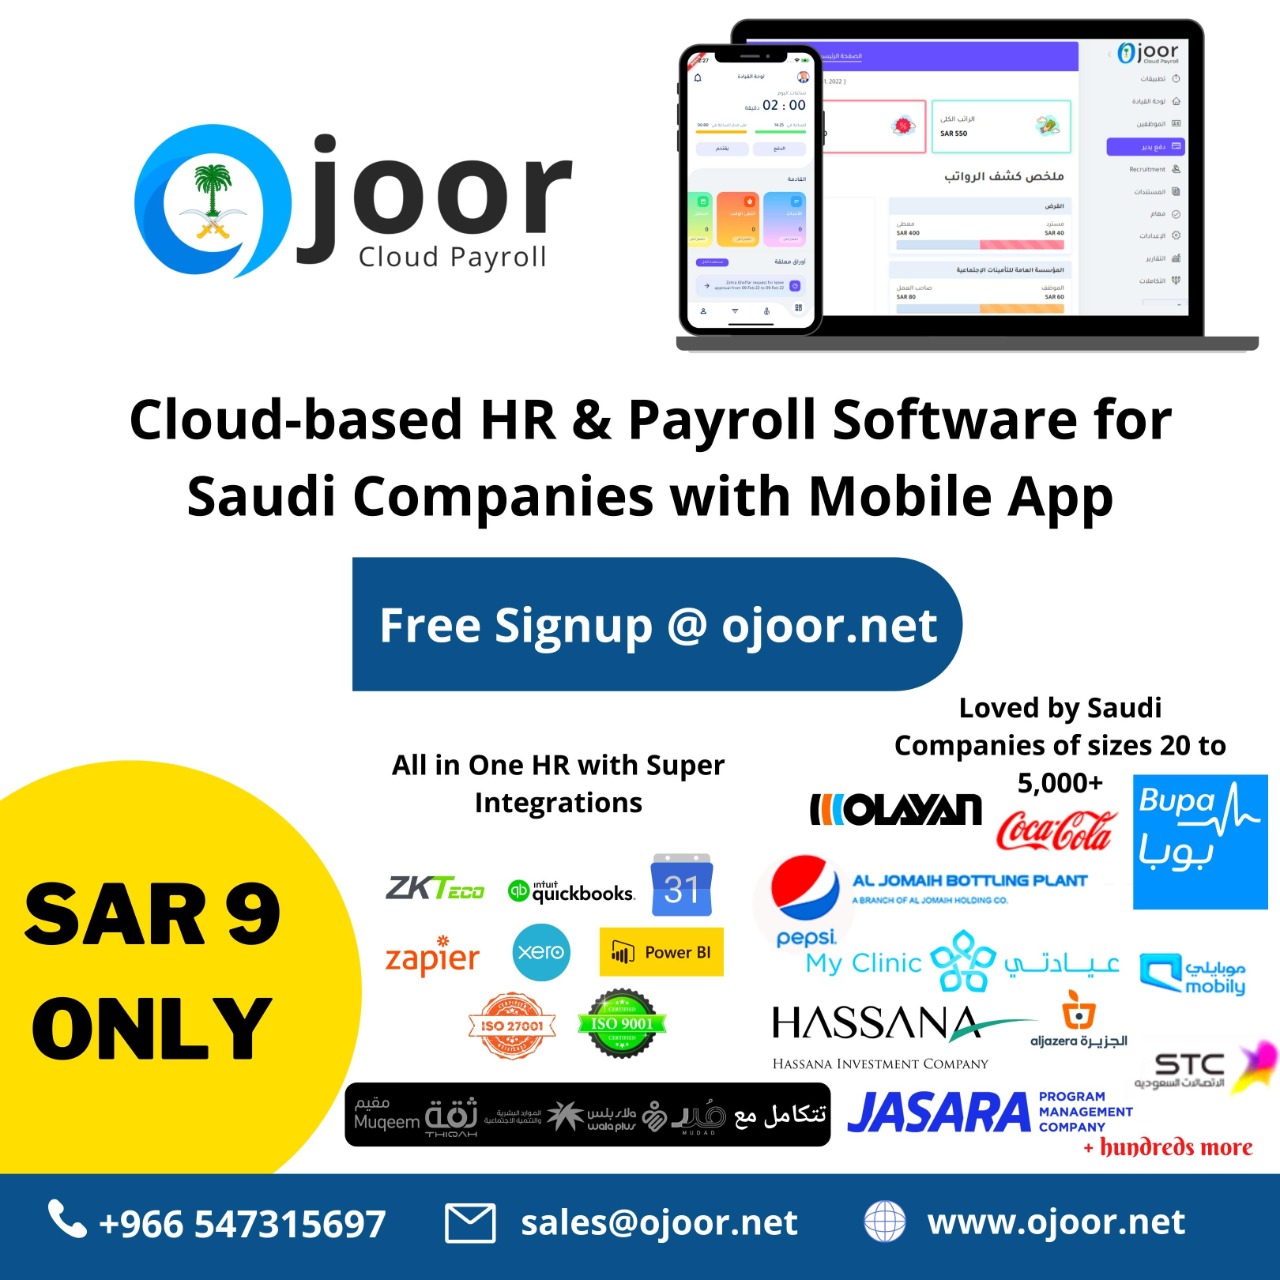 How does HR Software in Saudi Arabia assist with payroll?